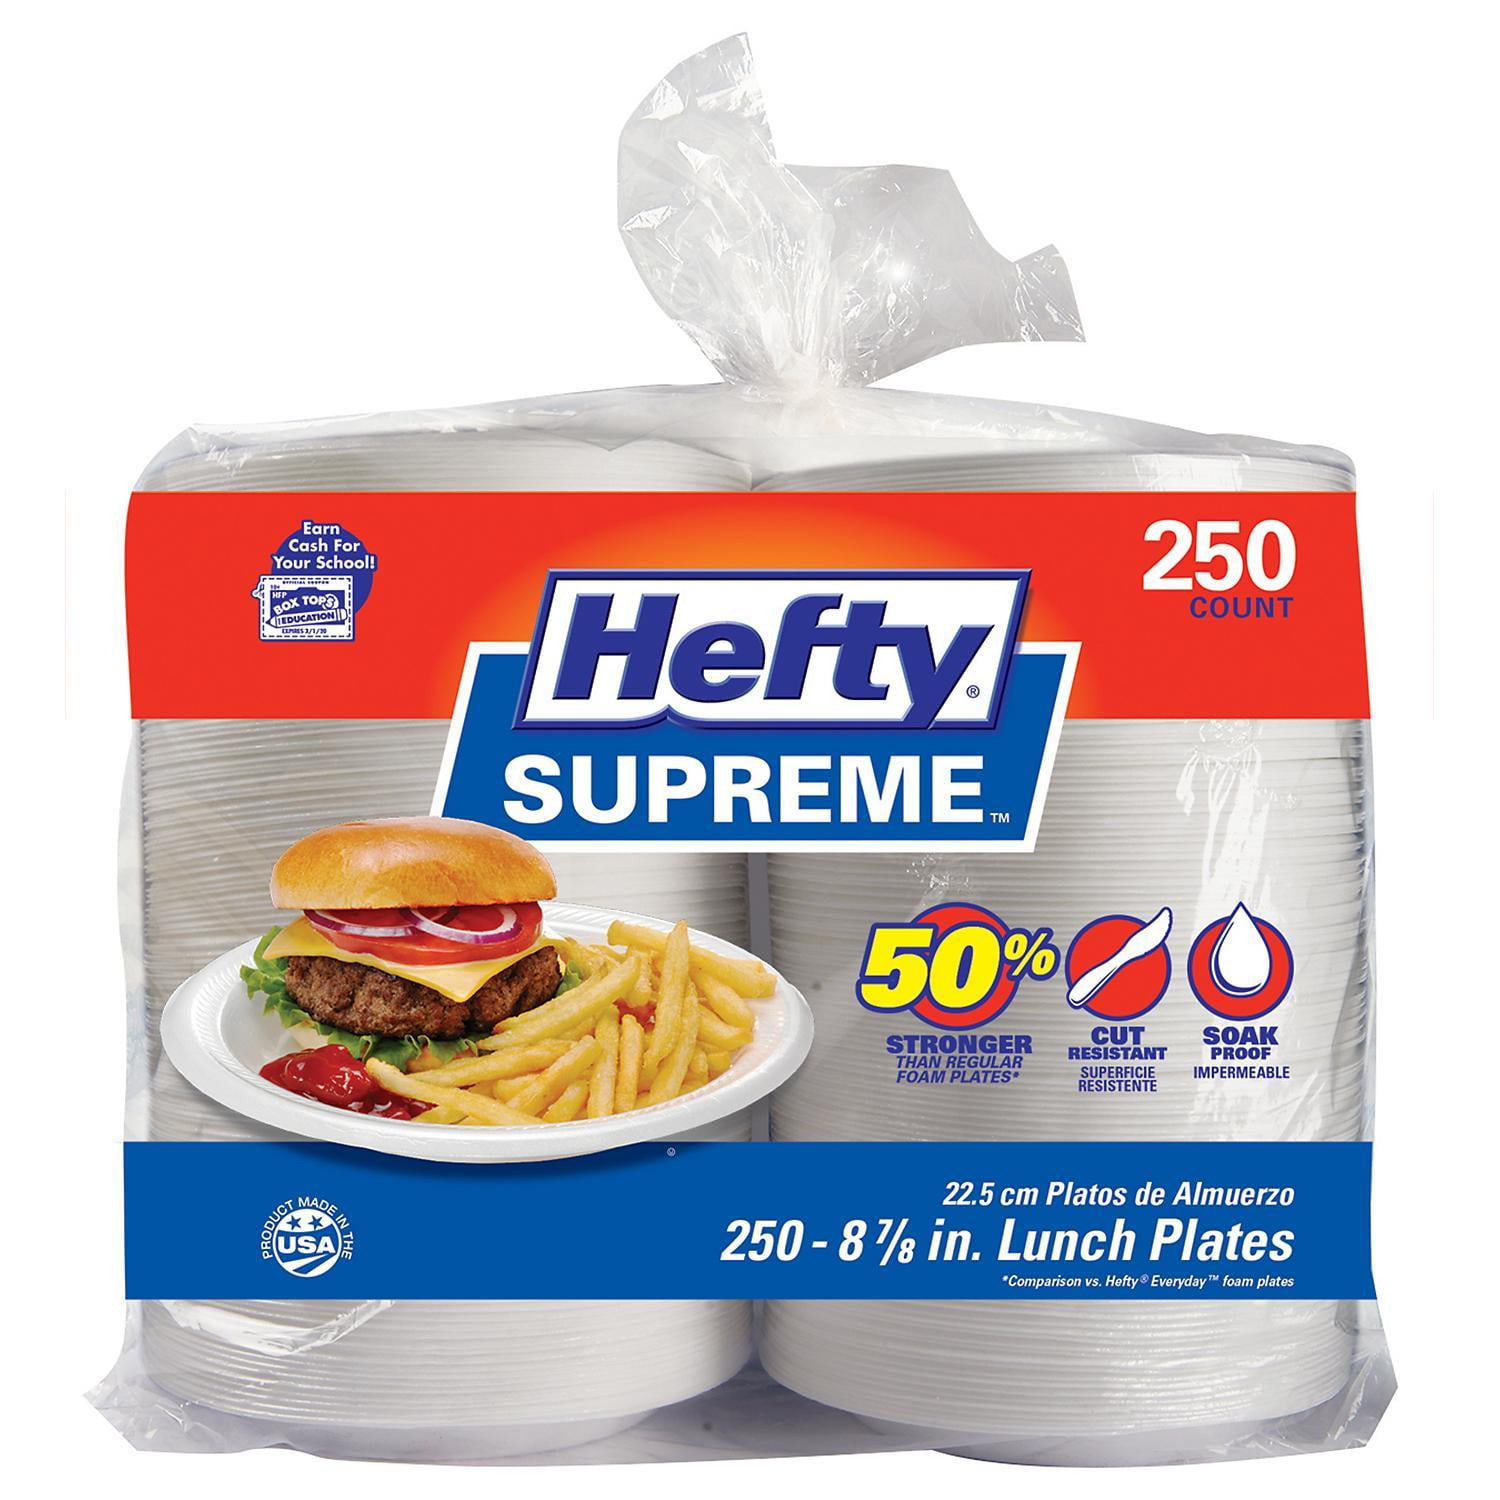 Hefty Supreme 8 7/8 Inch Foam Disposable Plates 250ct for sale online 